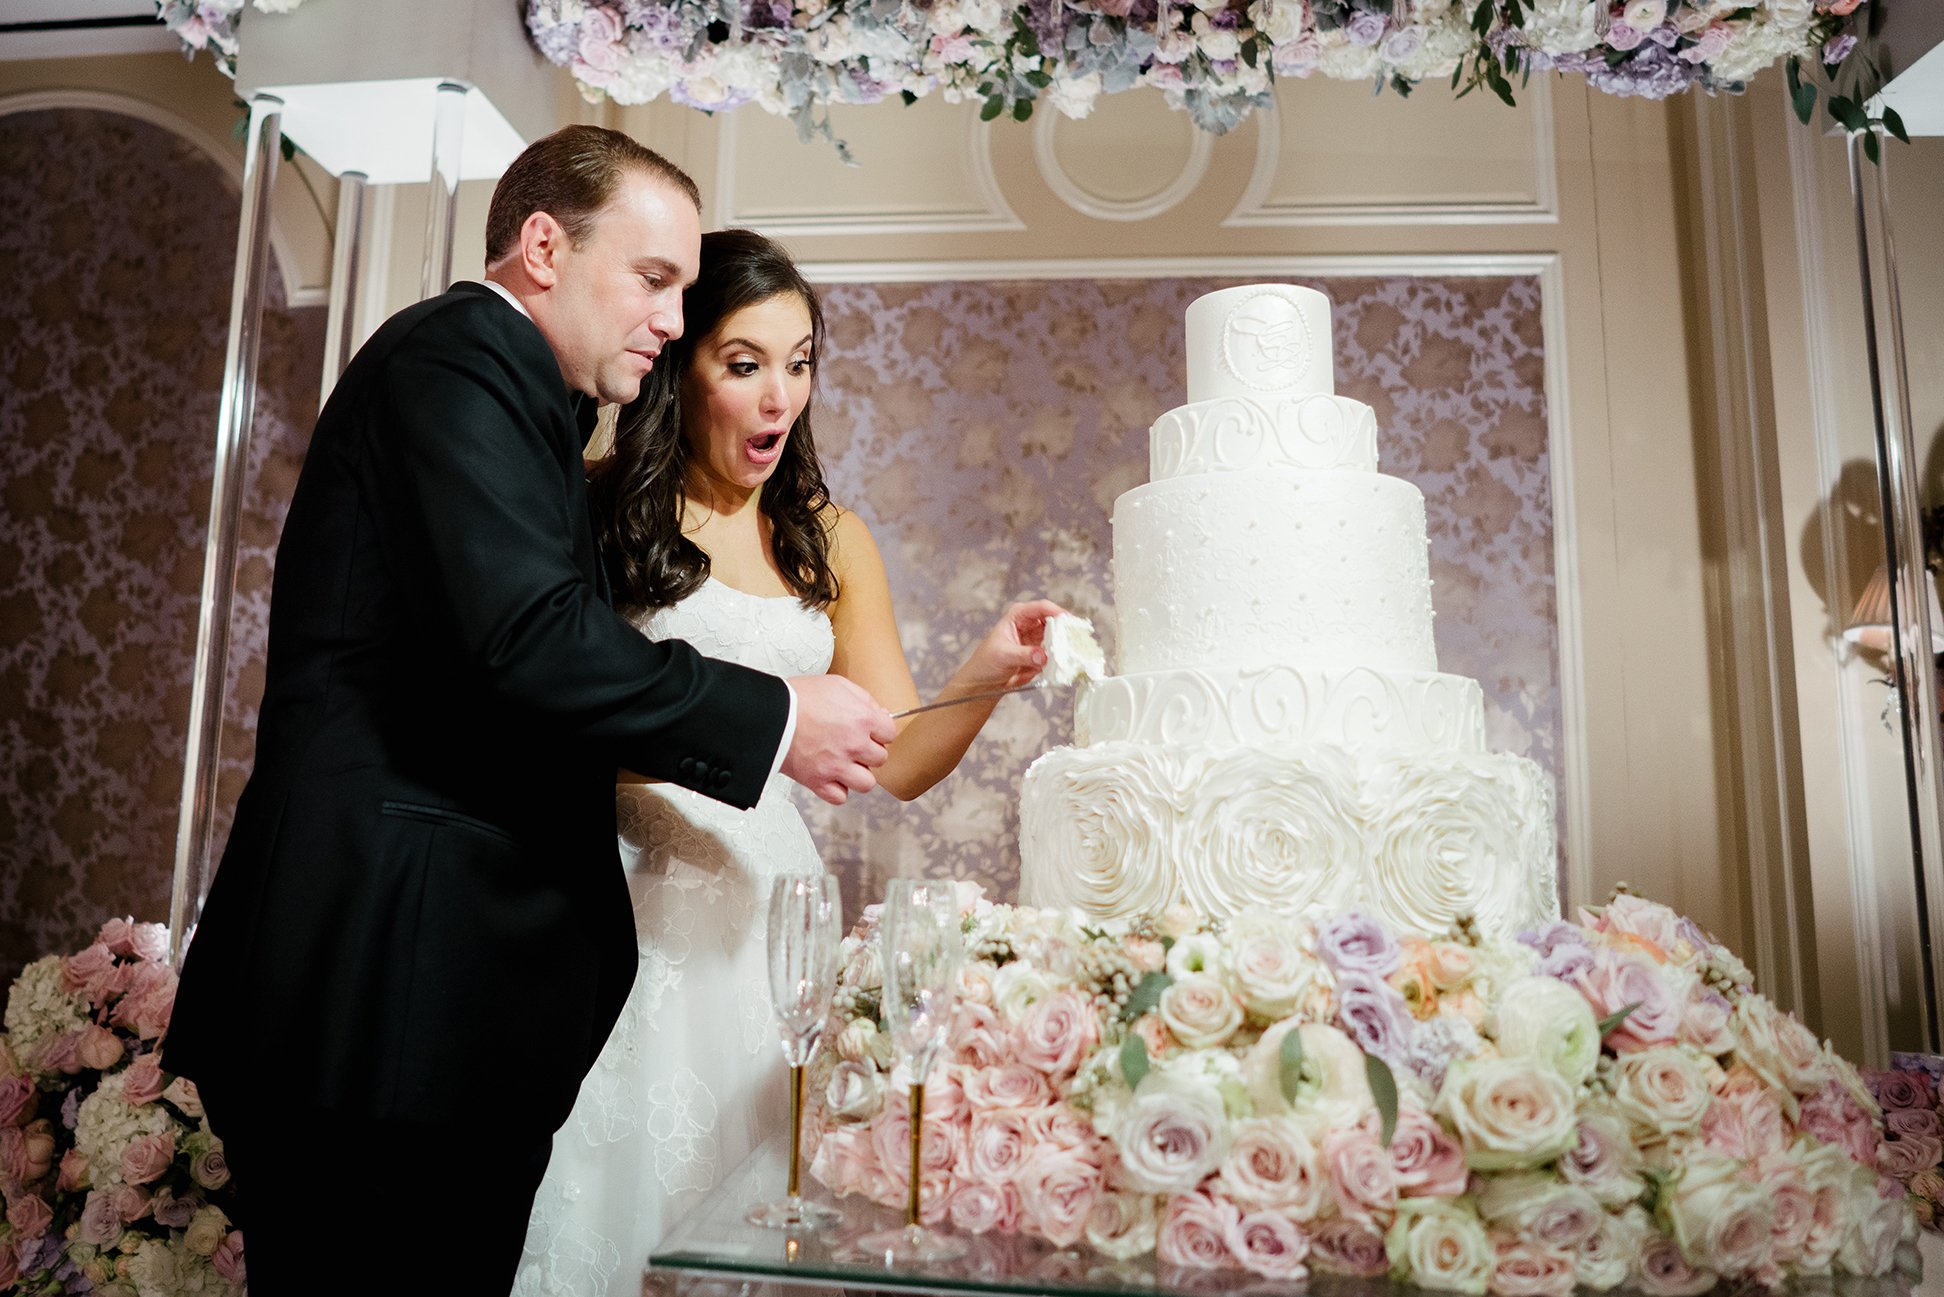 hotel wedding, wedding cake, cutting the cake, Susie's Cakes & Confections, Pink Flowers, couple